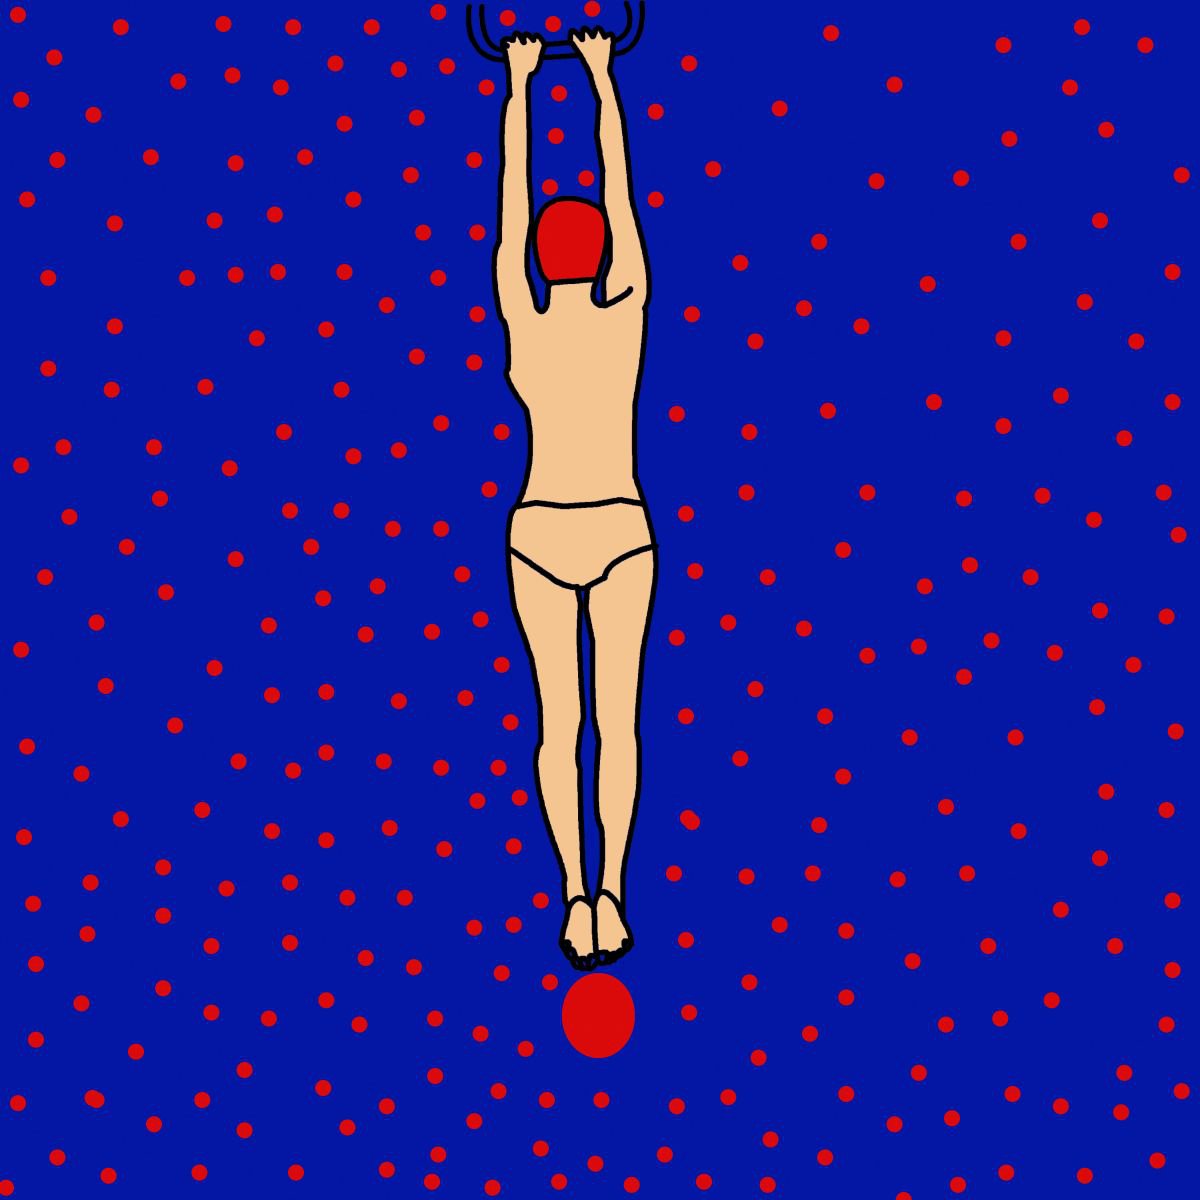 Hang in there by Rina Mualem - Pop art